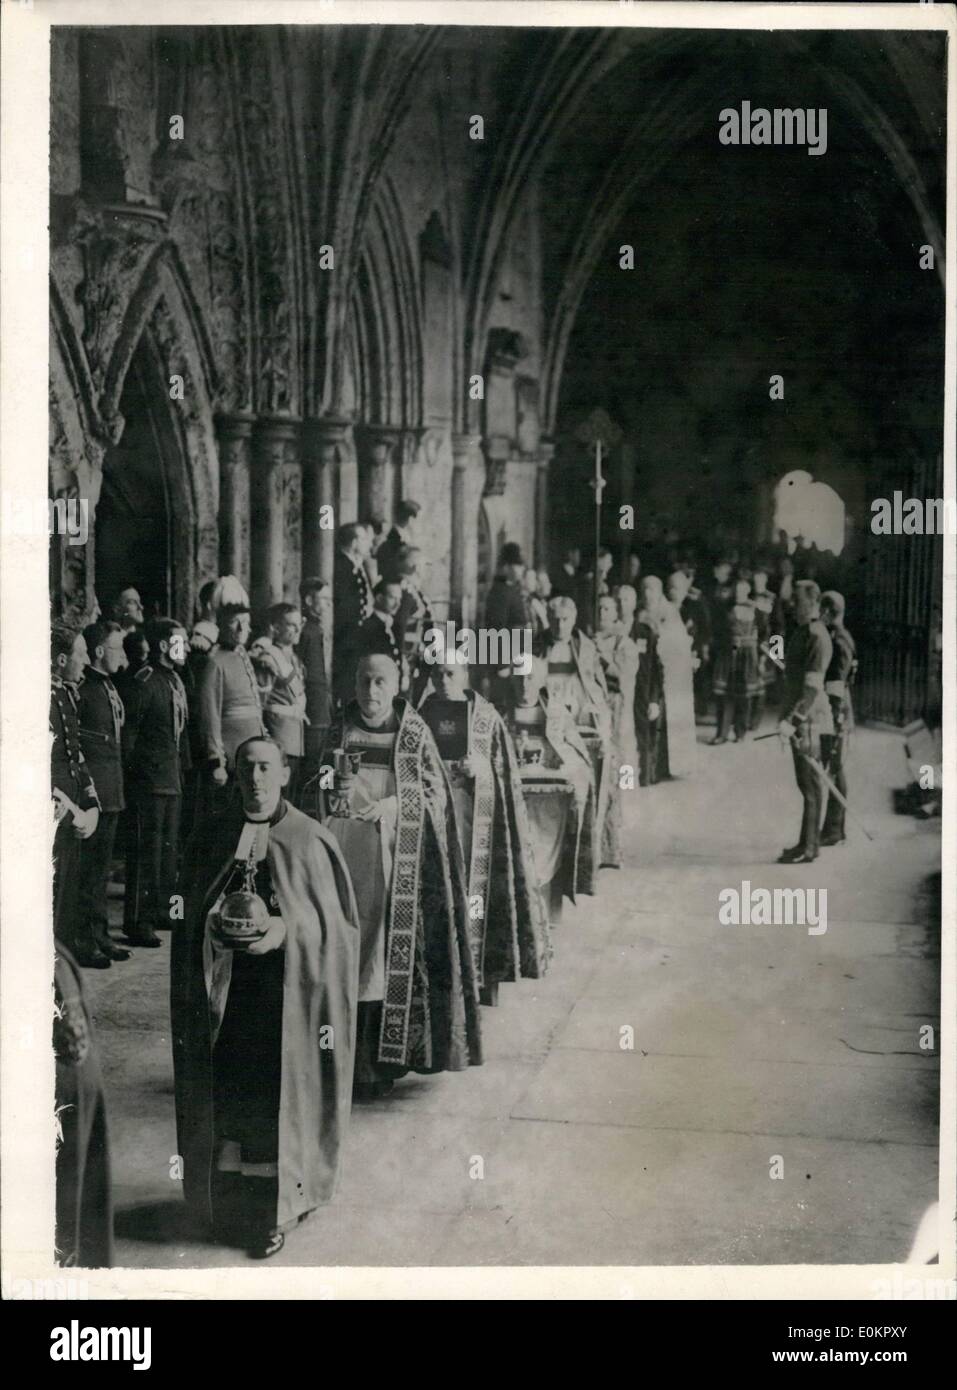 Dec. 12, 1937 - 12-5-37 Regalia carried in procession to the coronation ceremony. The priceless Royal regalia was carried in procession through the cloisters of Westminster Abbey from the Jerusalem Chamber to the High Altar for the Coronation ceremony. OPS: The crowns photographed being carried in the regalia procession today. Stock Photo